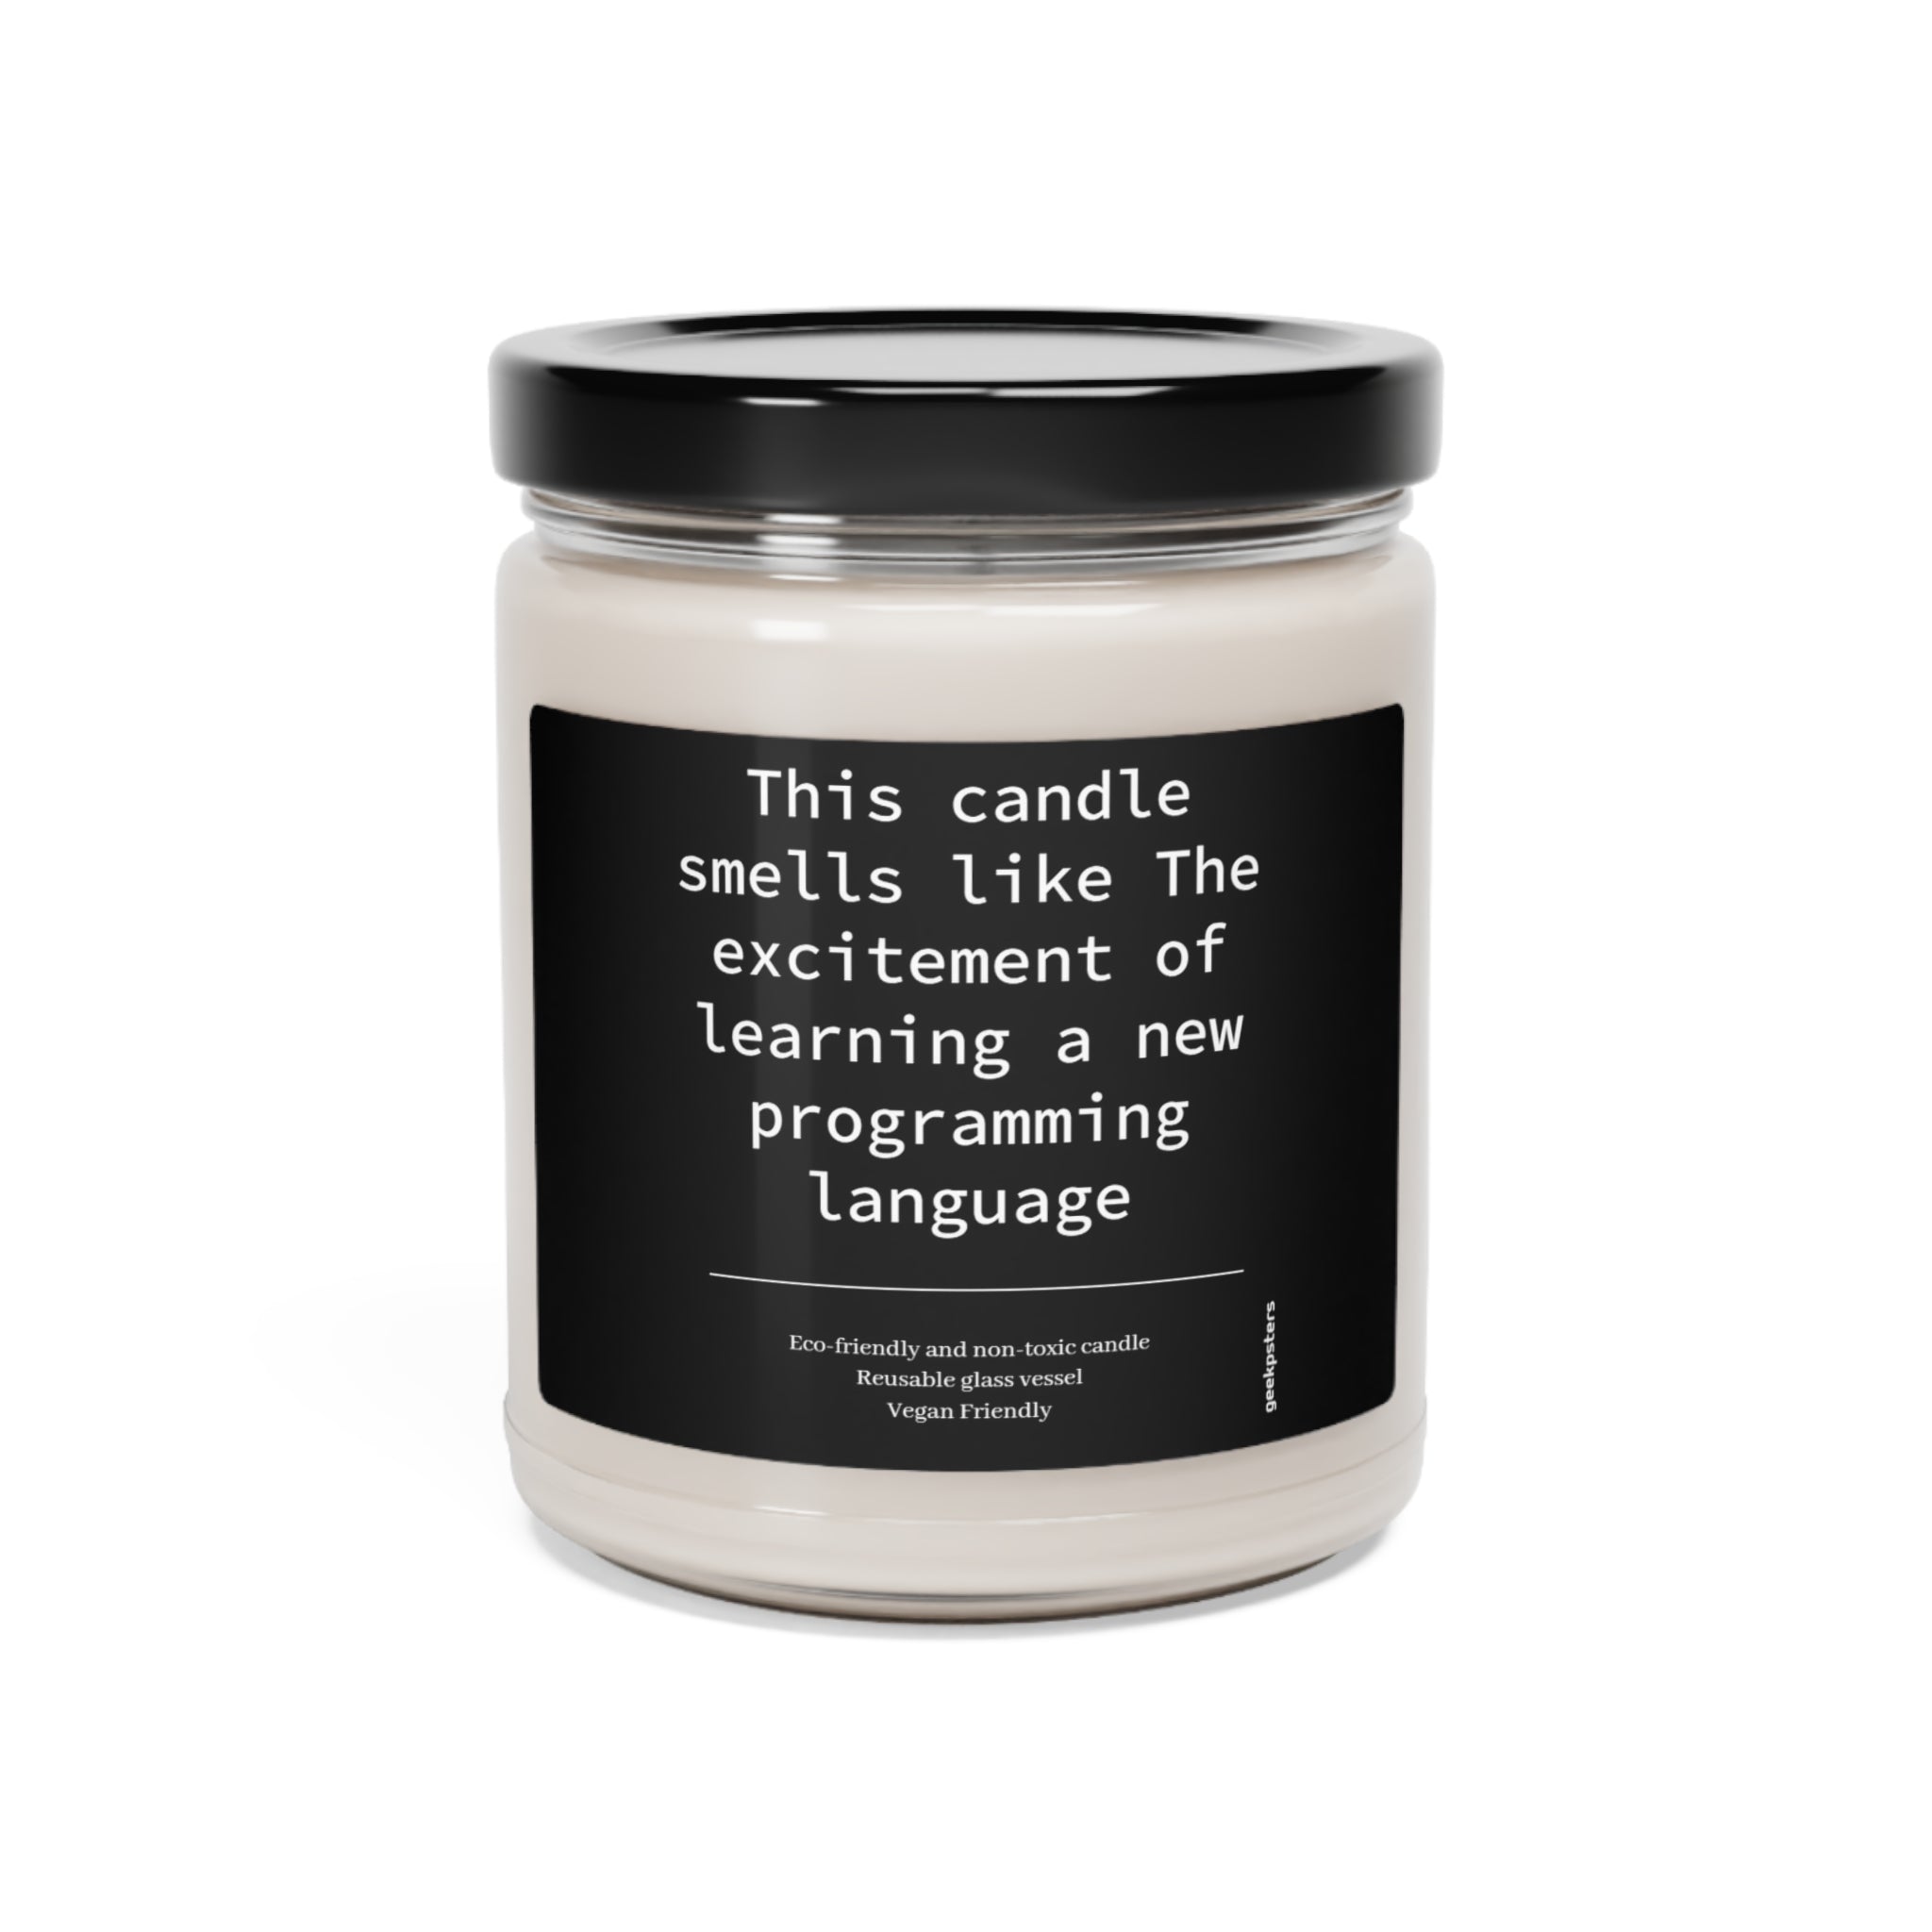 A Scented Soy Candle in a clear jar with a label reading "this candle smells like the excitement of learning a new programming language." Eco-friendly and vegan-friendly text is also visible.